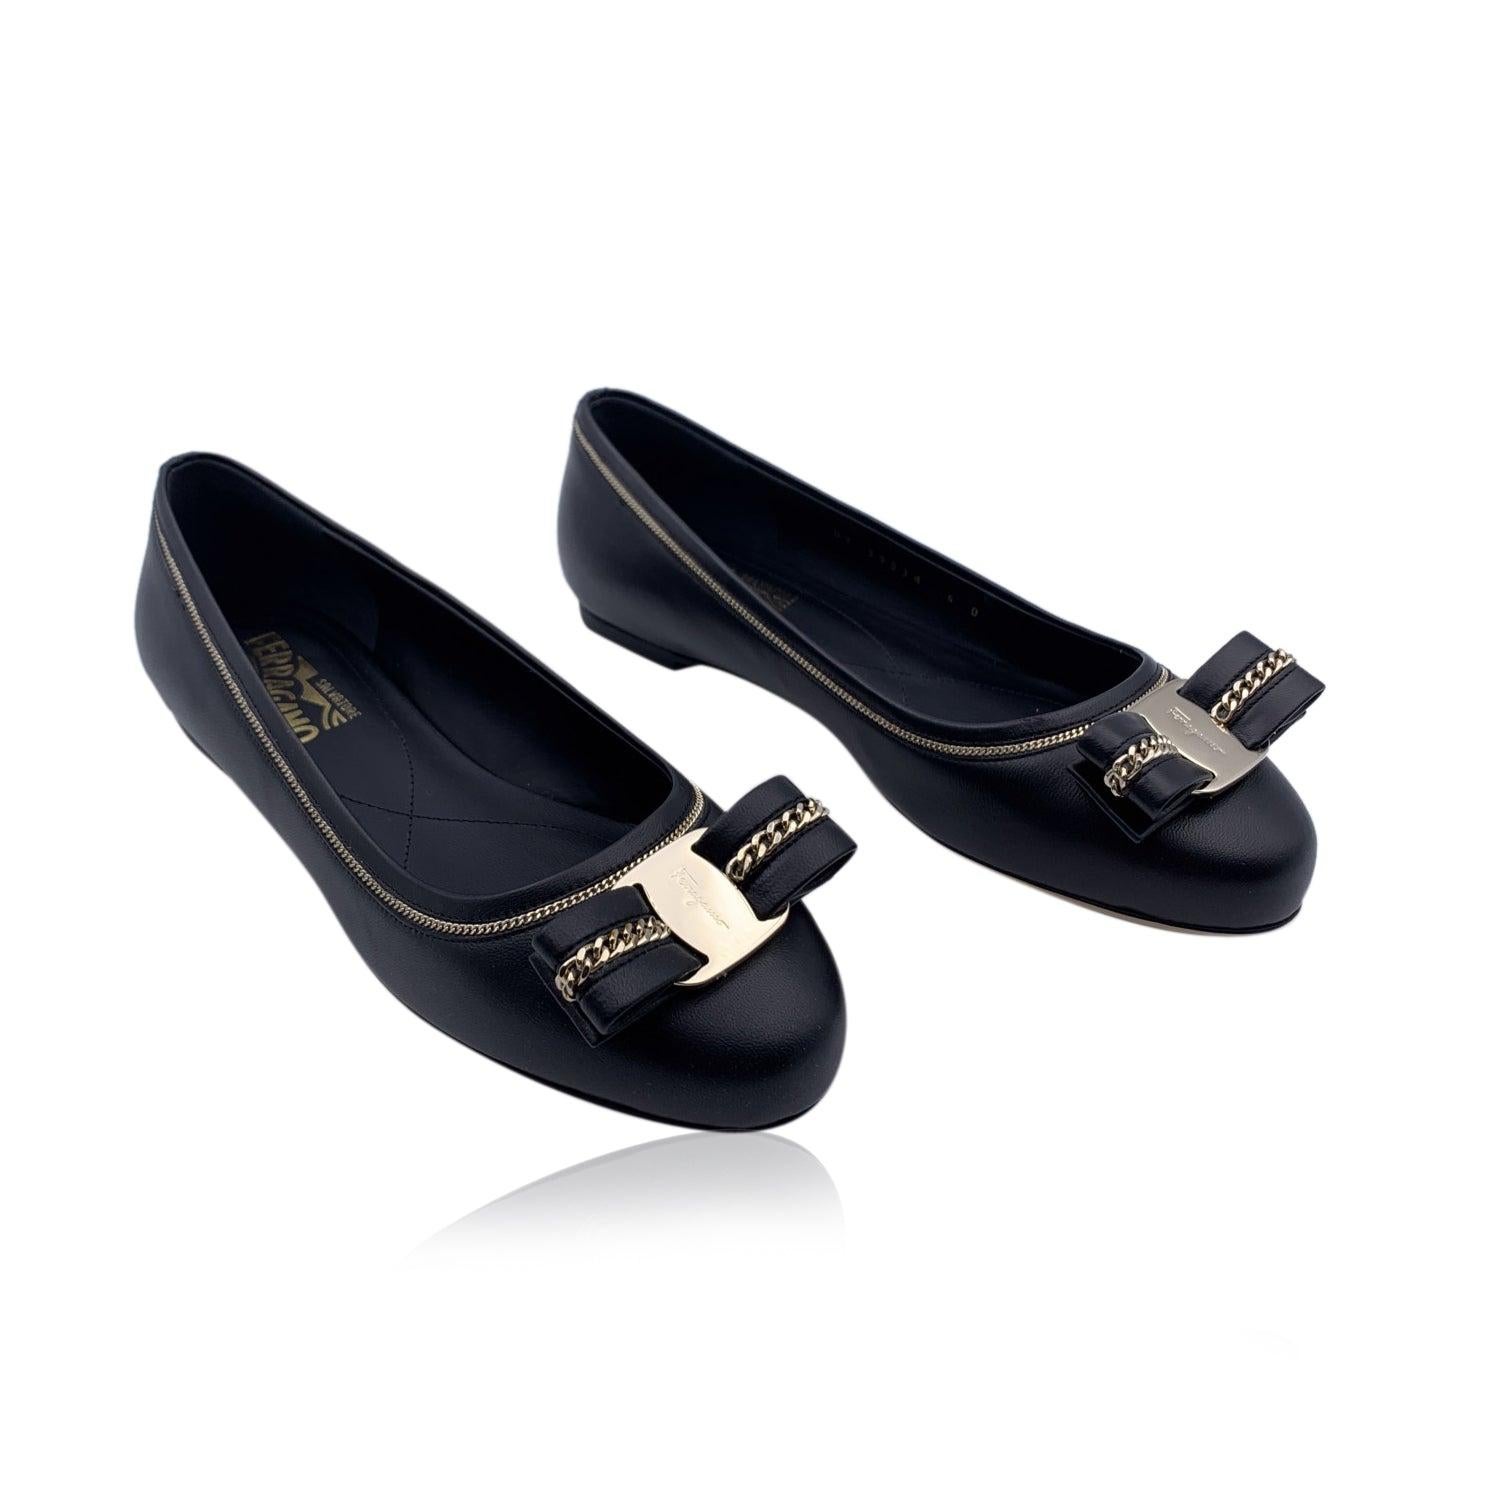 Sophisticated Salvatore Ferragamo 'Varina Lux' Ballet Flats. Crafted in black leather with gold metal chain detailing on borders. They feature a round toe, Vara-bow with chain on the toes. Leather sole. Made in Italy. Size: US 5.5C- EU 36C (The size